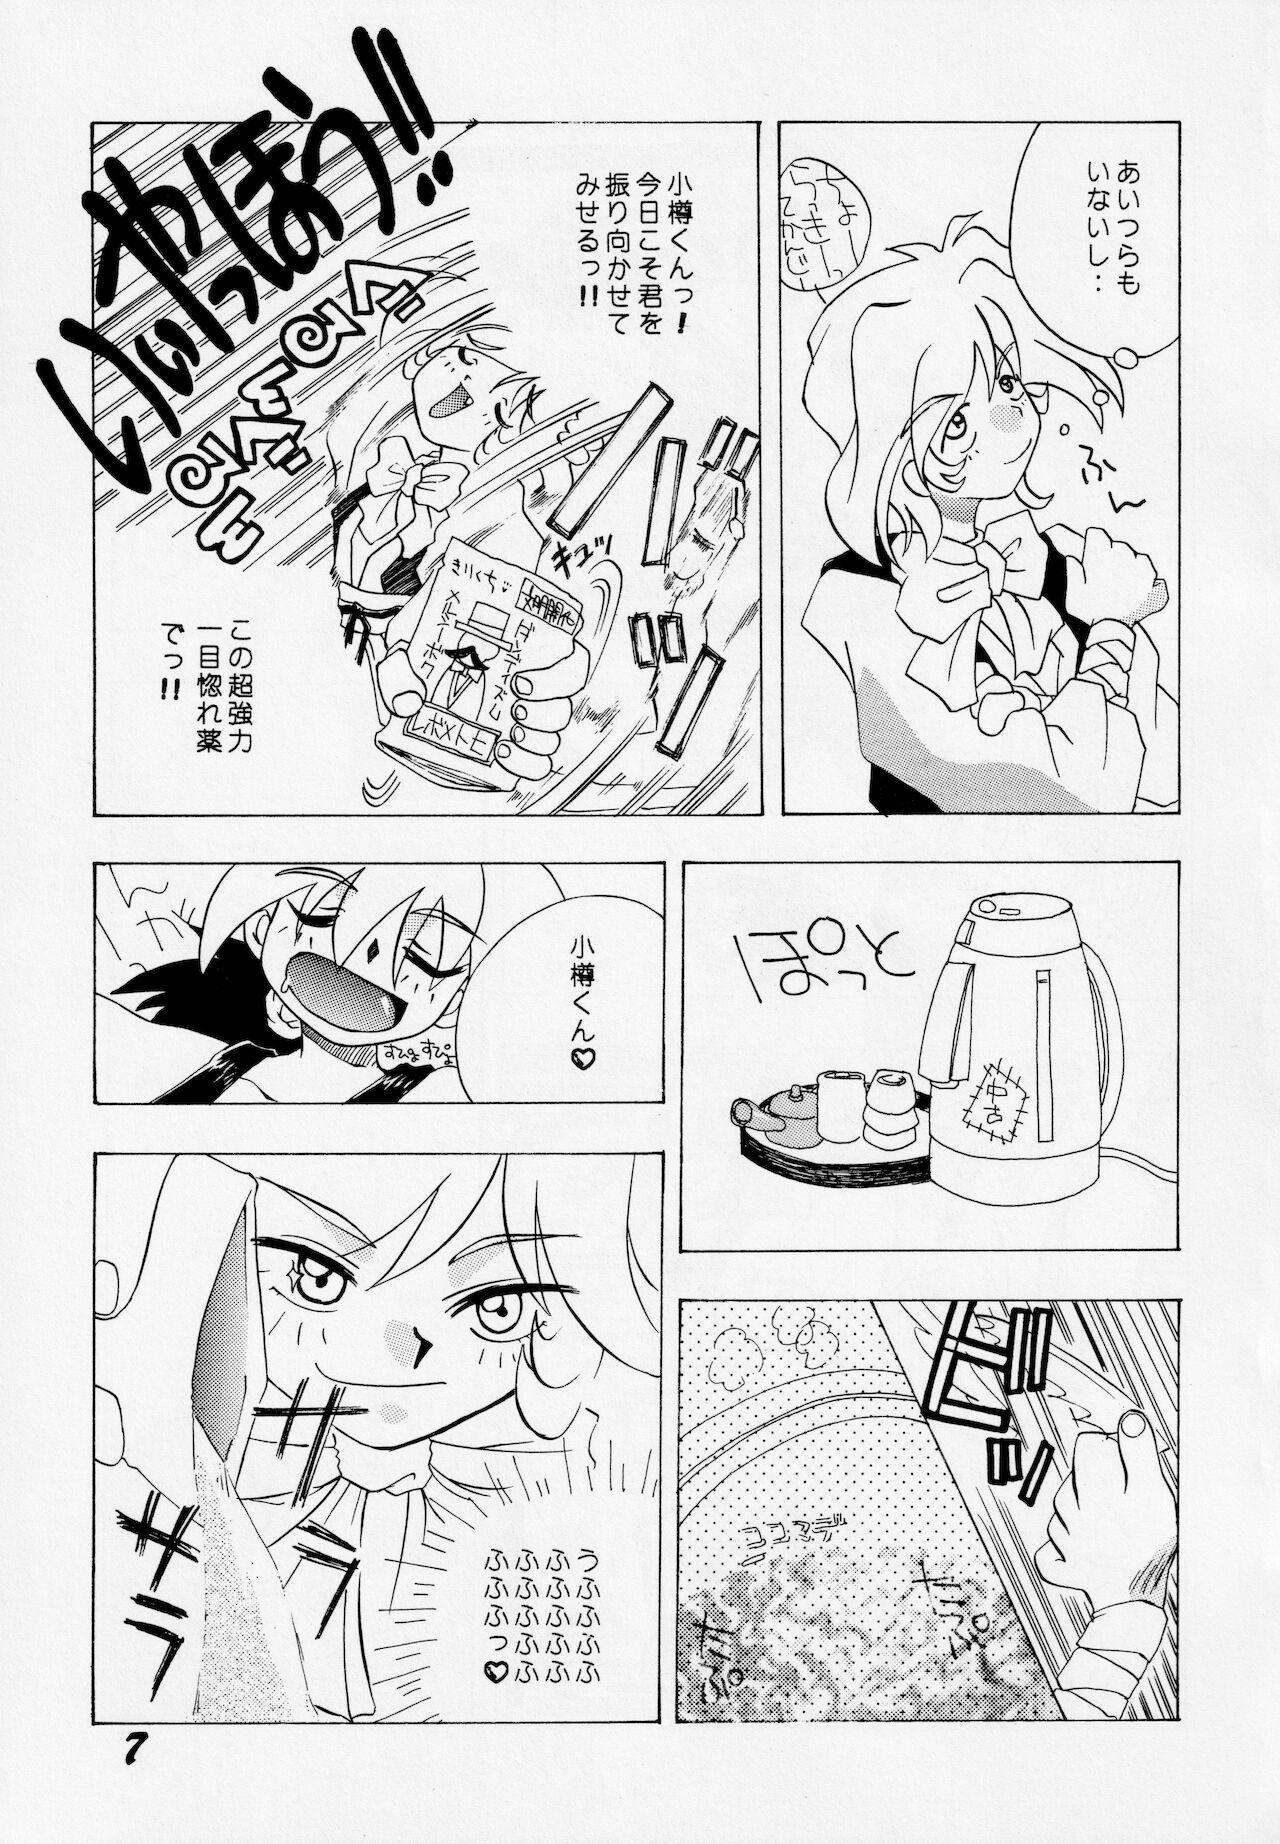 Long Hair Abaredaiko 2 - Saber marionette Sex Party - Page 6